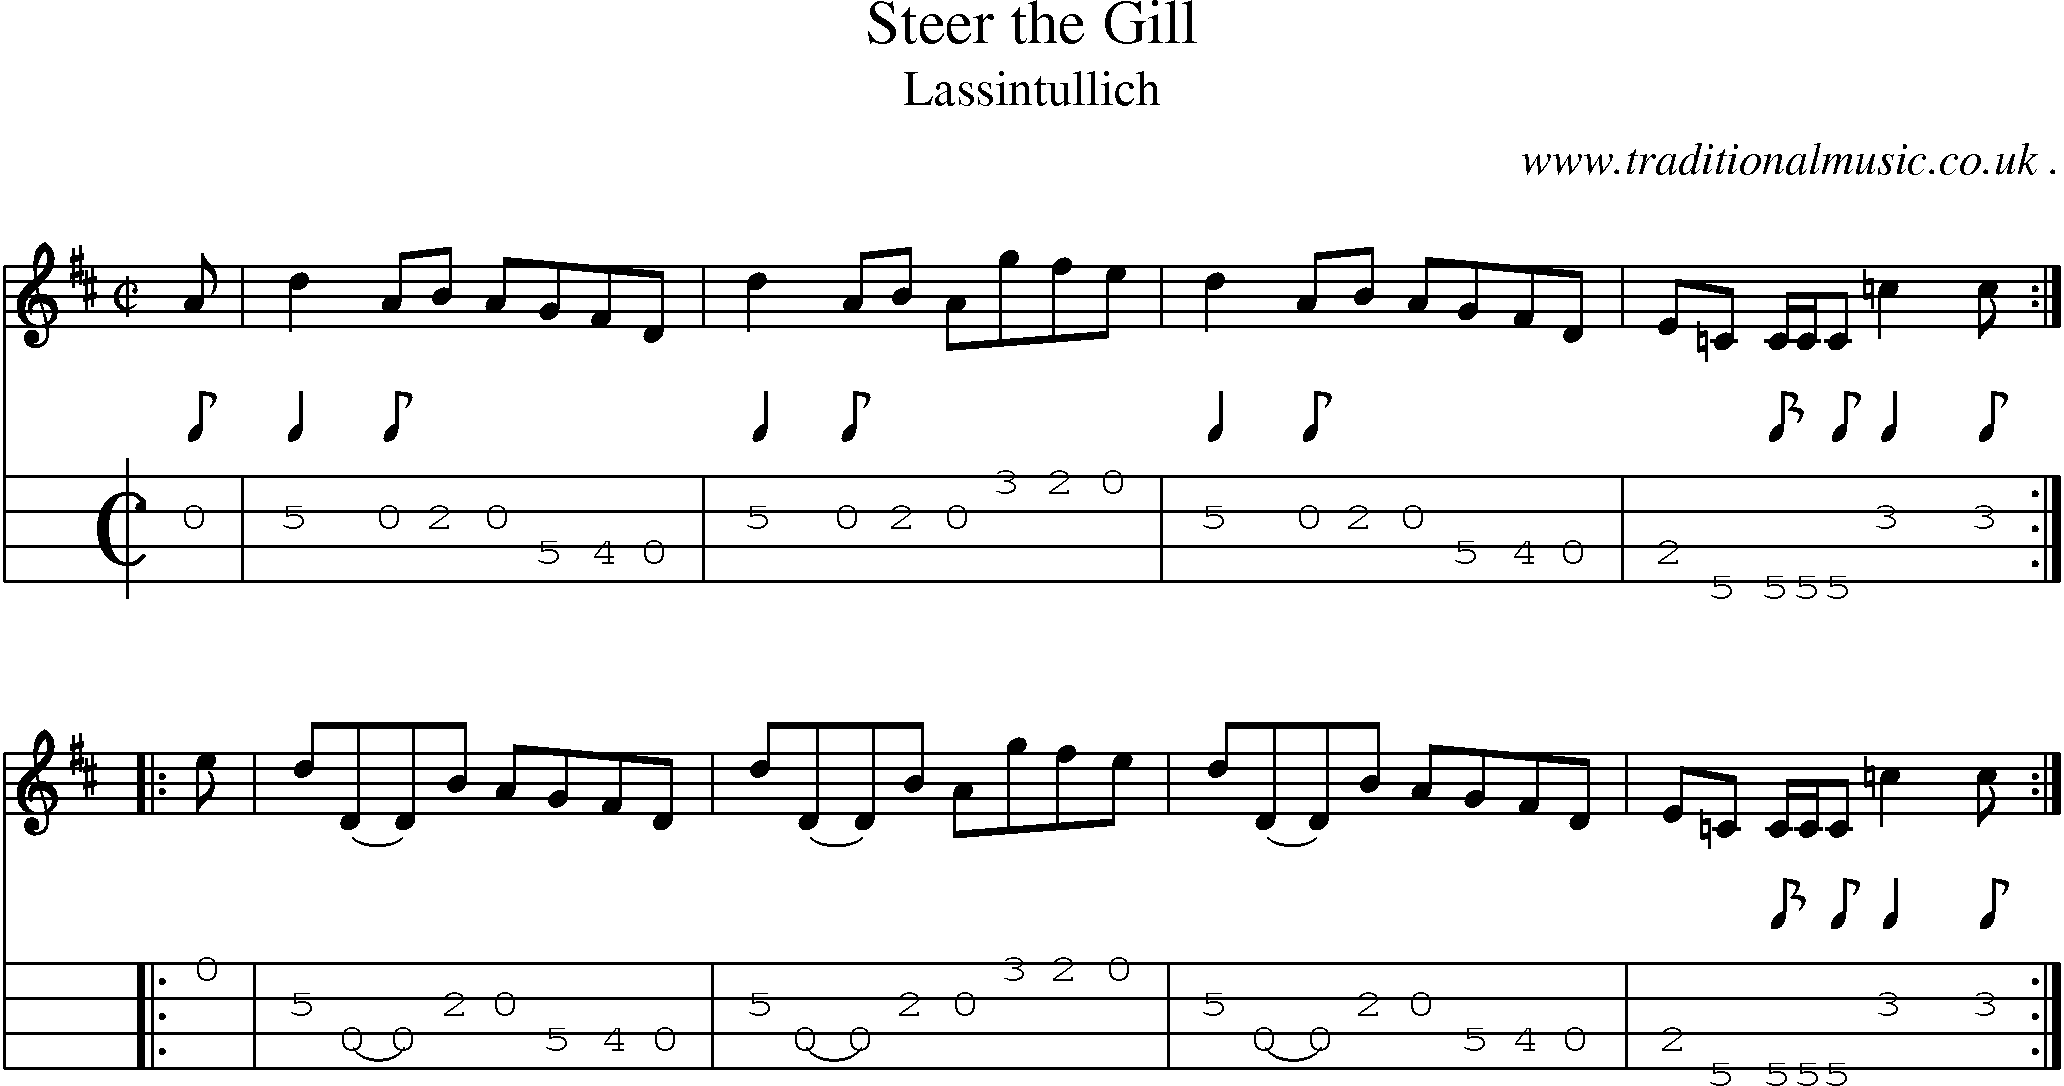 Sheet-music  score, Chords and Mandolin Tabs for Steer The Gill